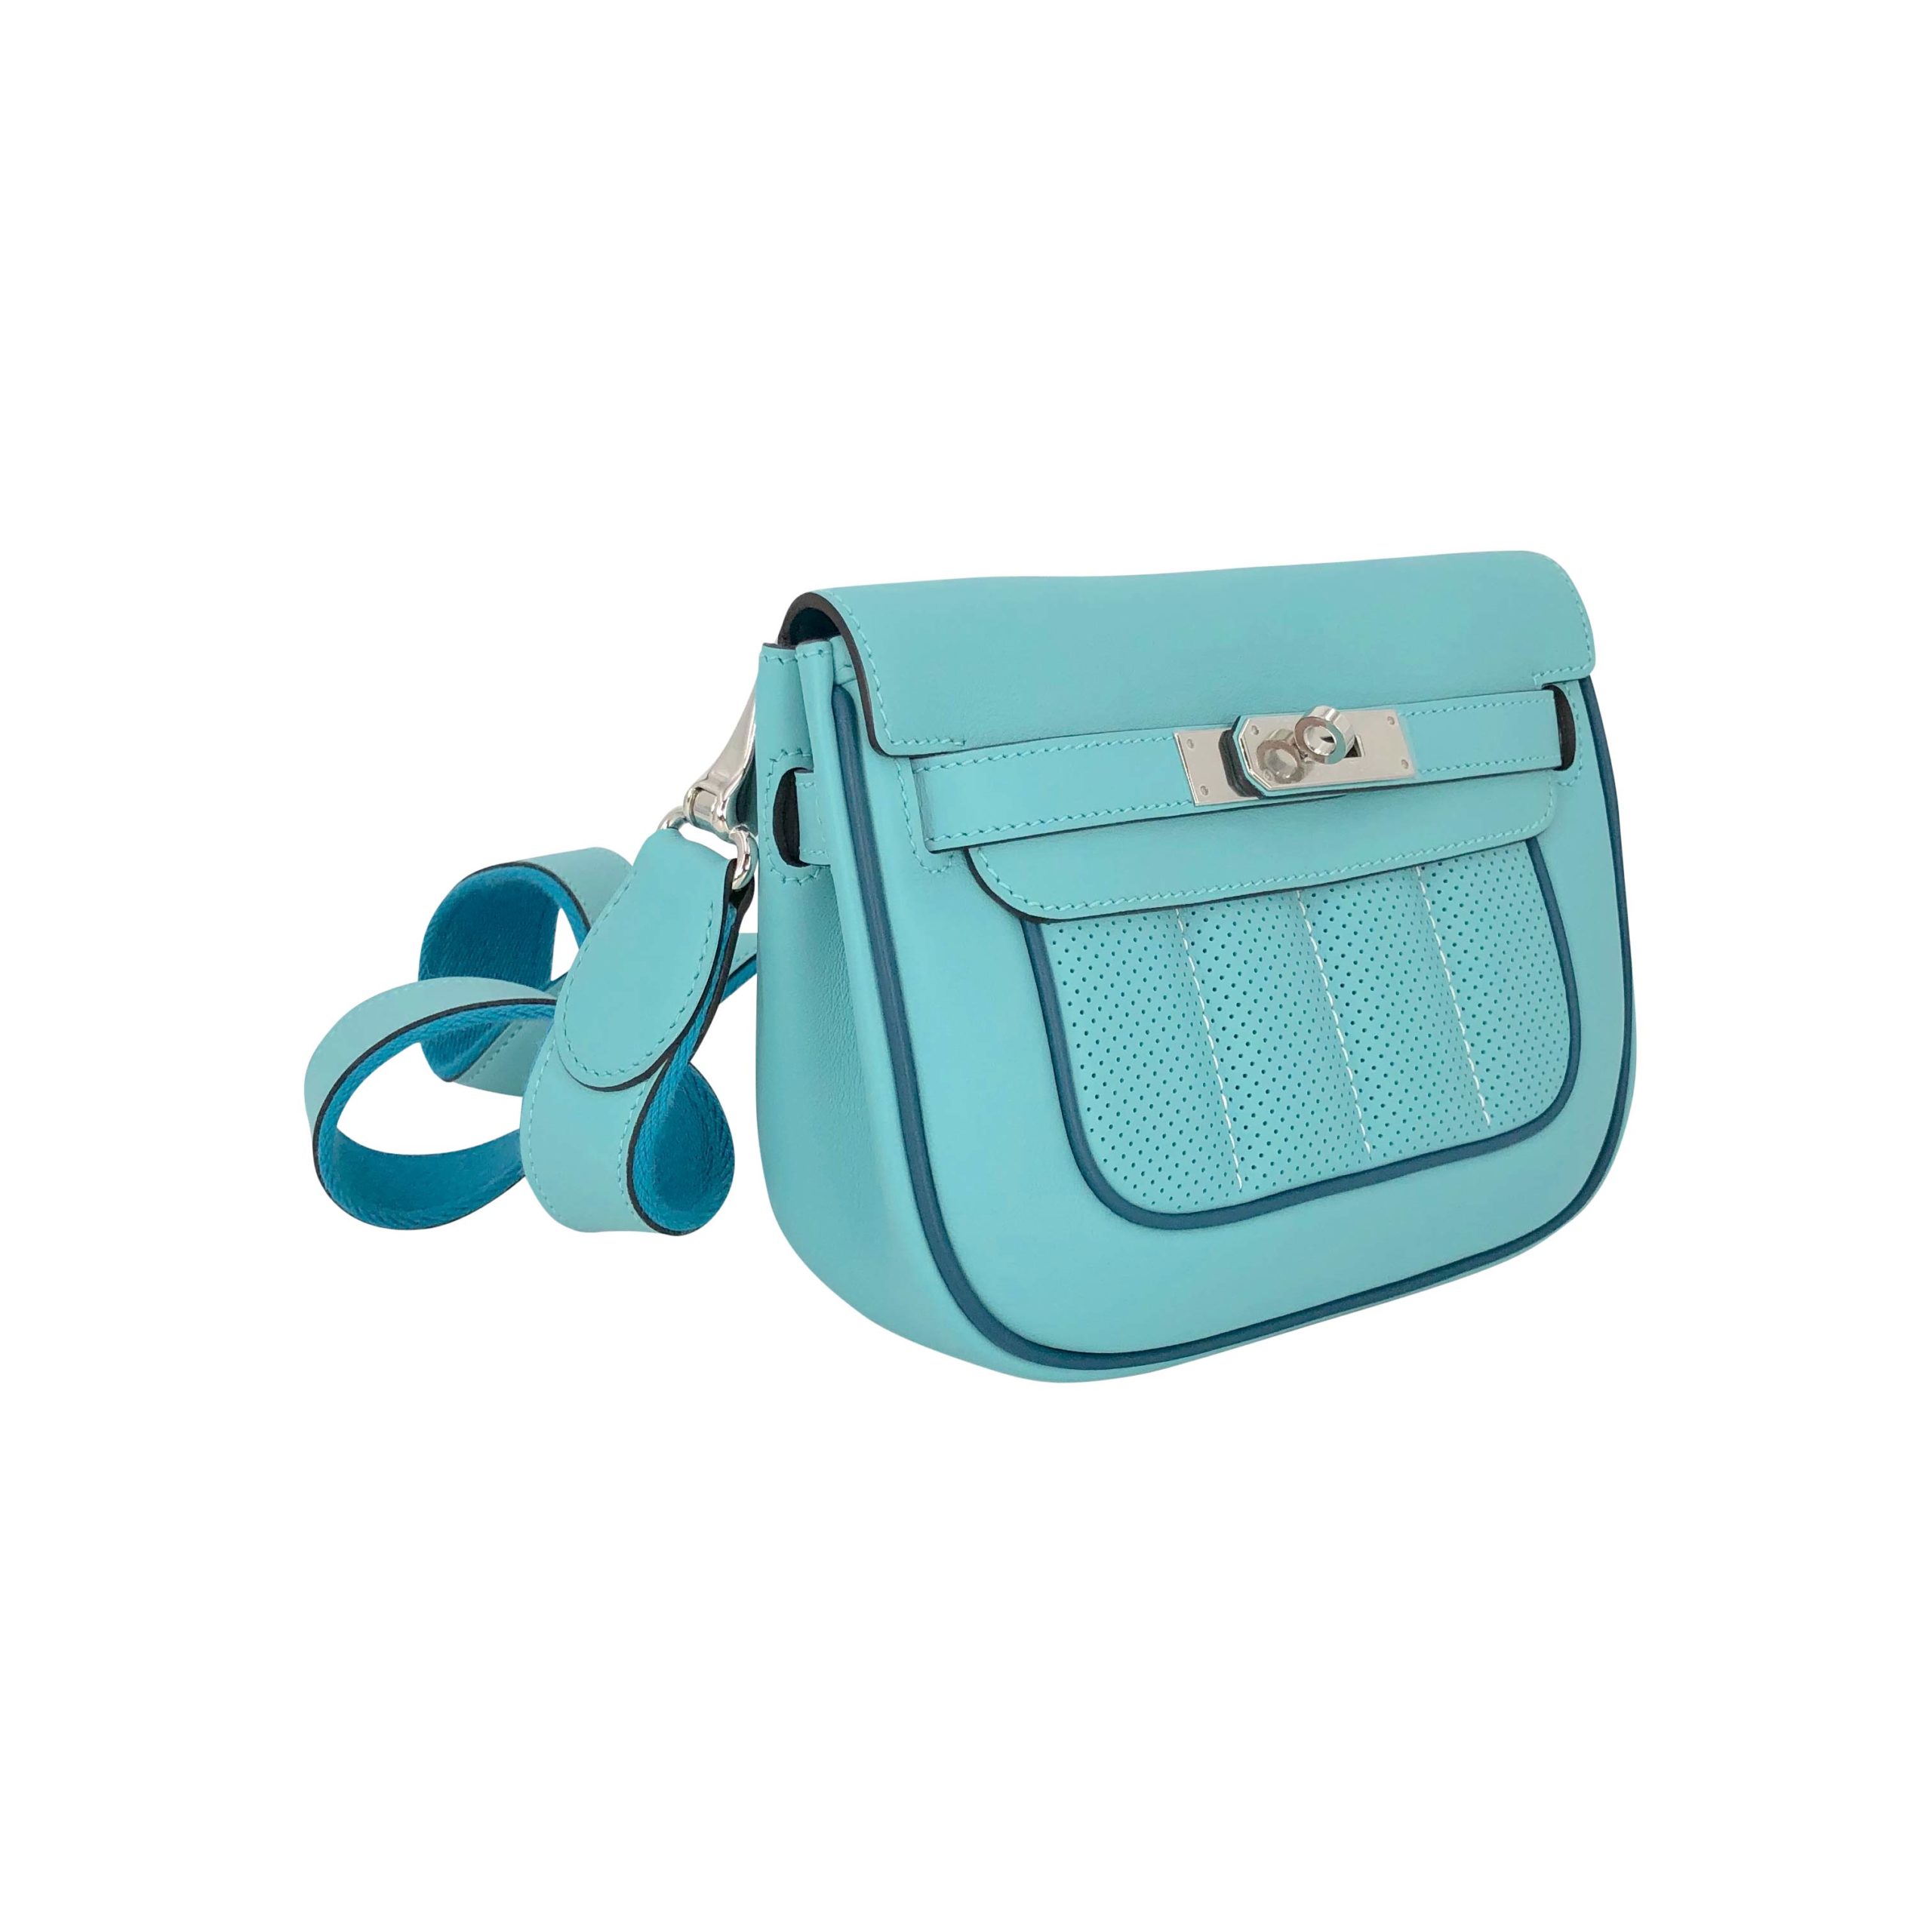 Hermes Berline 21 Crossbody Bag in Turquoise Swift with Two Tone Strap PHW